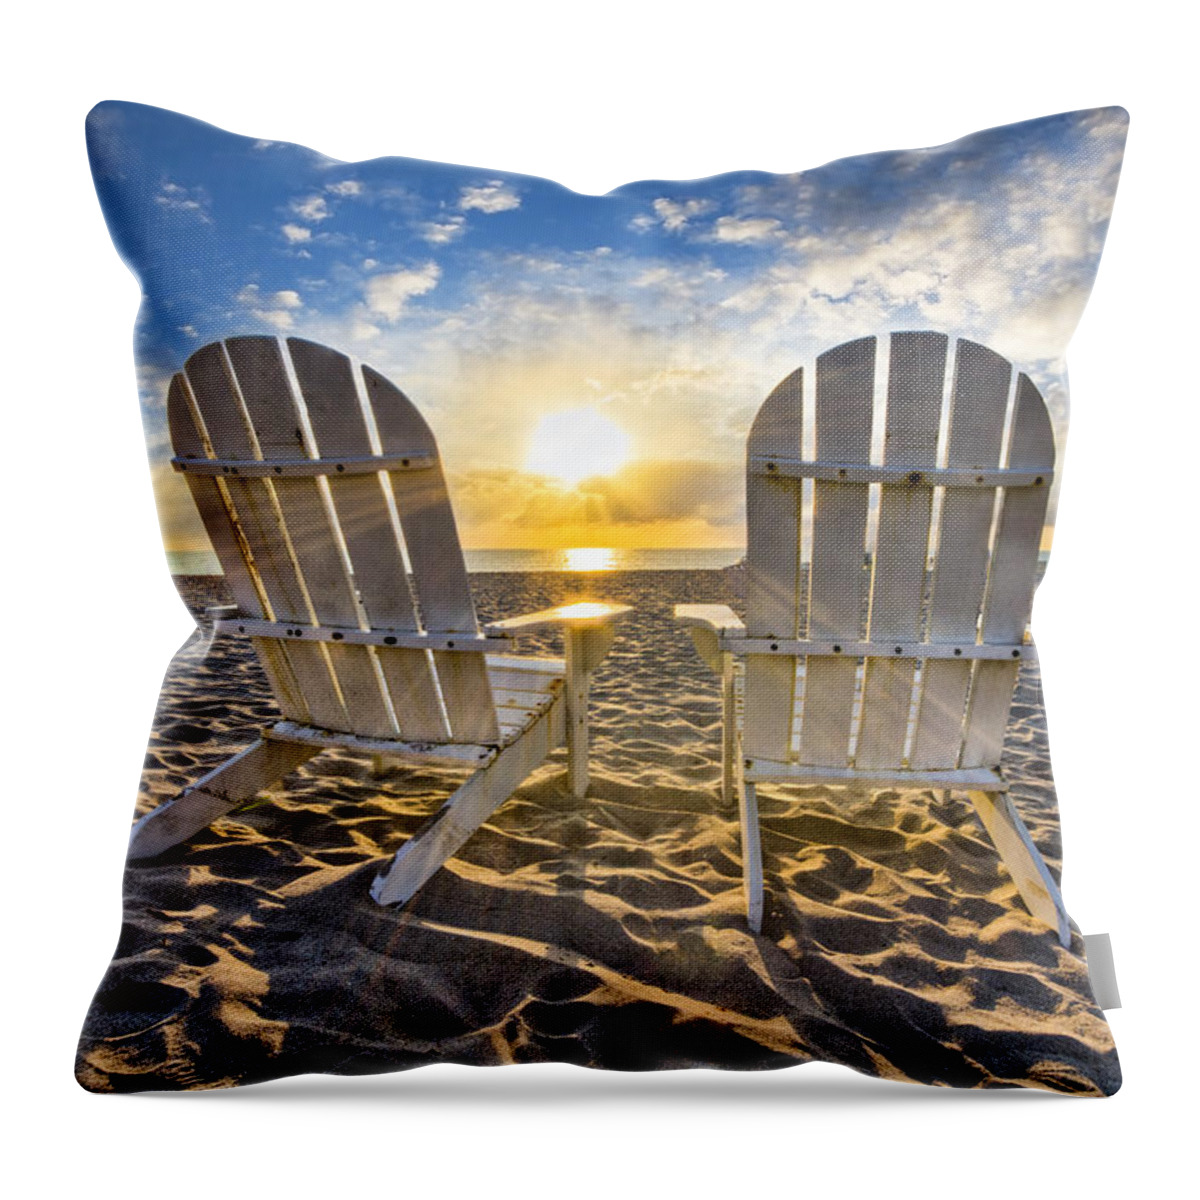 Clouds Throw Pillow featuring the photograph The Salt Life by Debra and Dave Vanderlaan